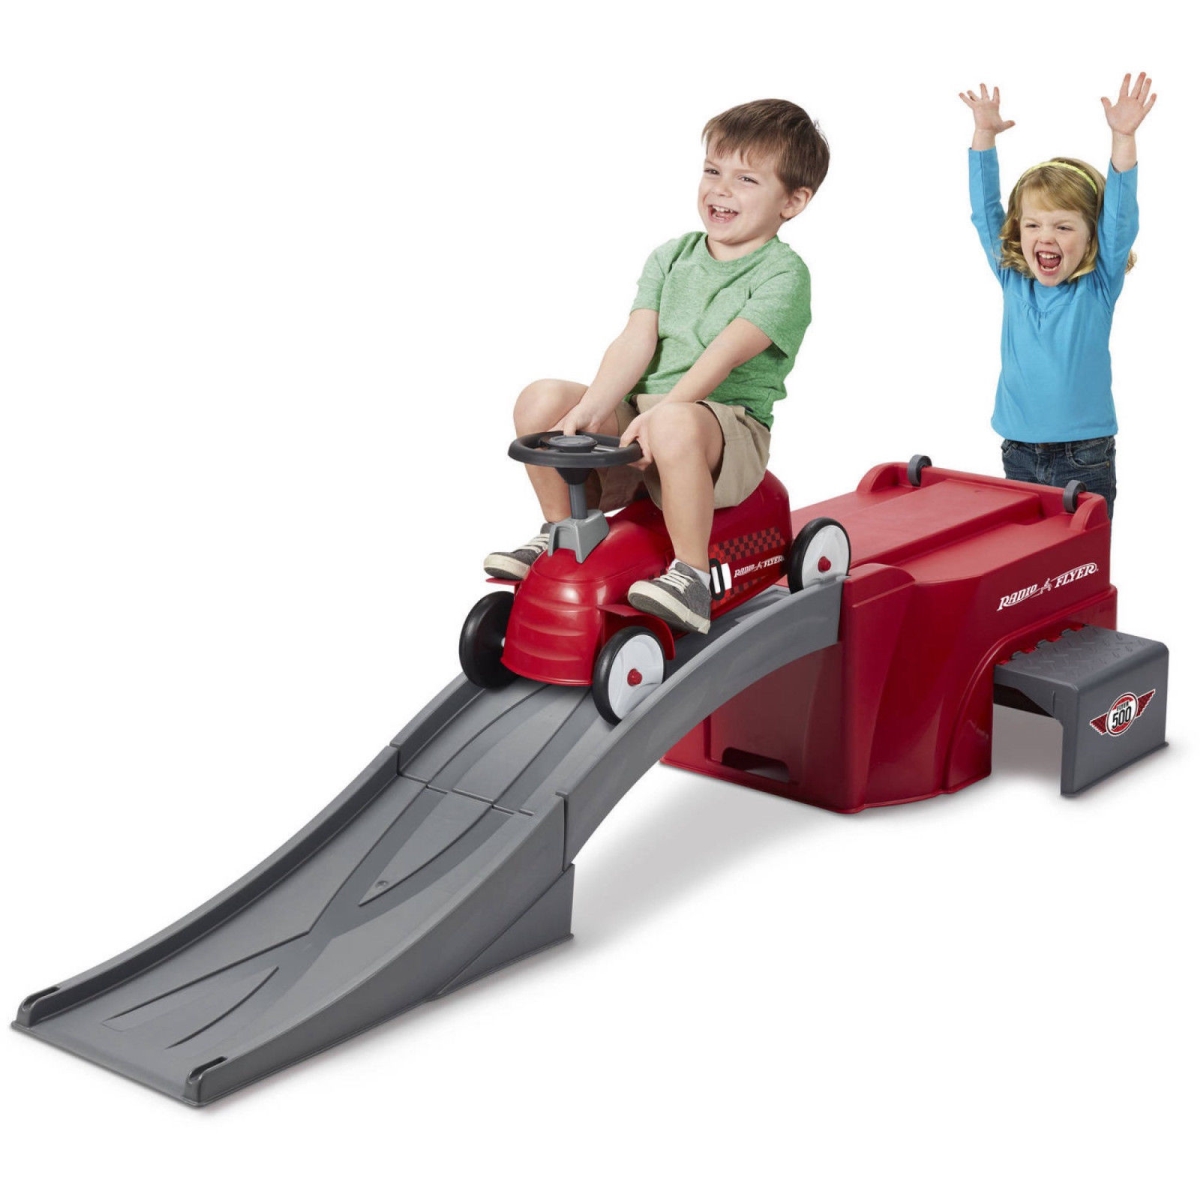 606x 500 Ride On Car With Ramp Kids Toddler Toy Racing Sliding Race Track, Red - Boys & Girls